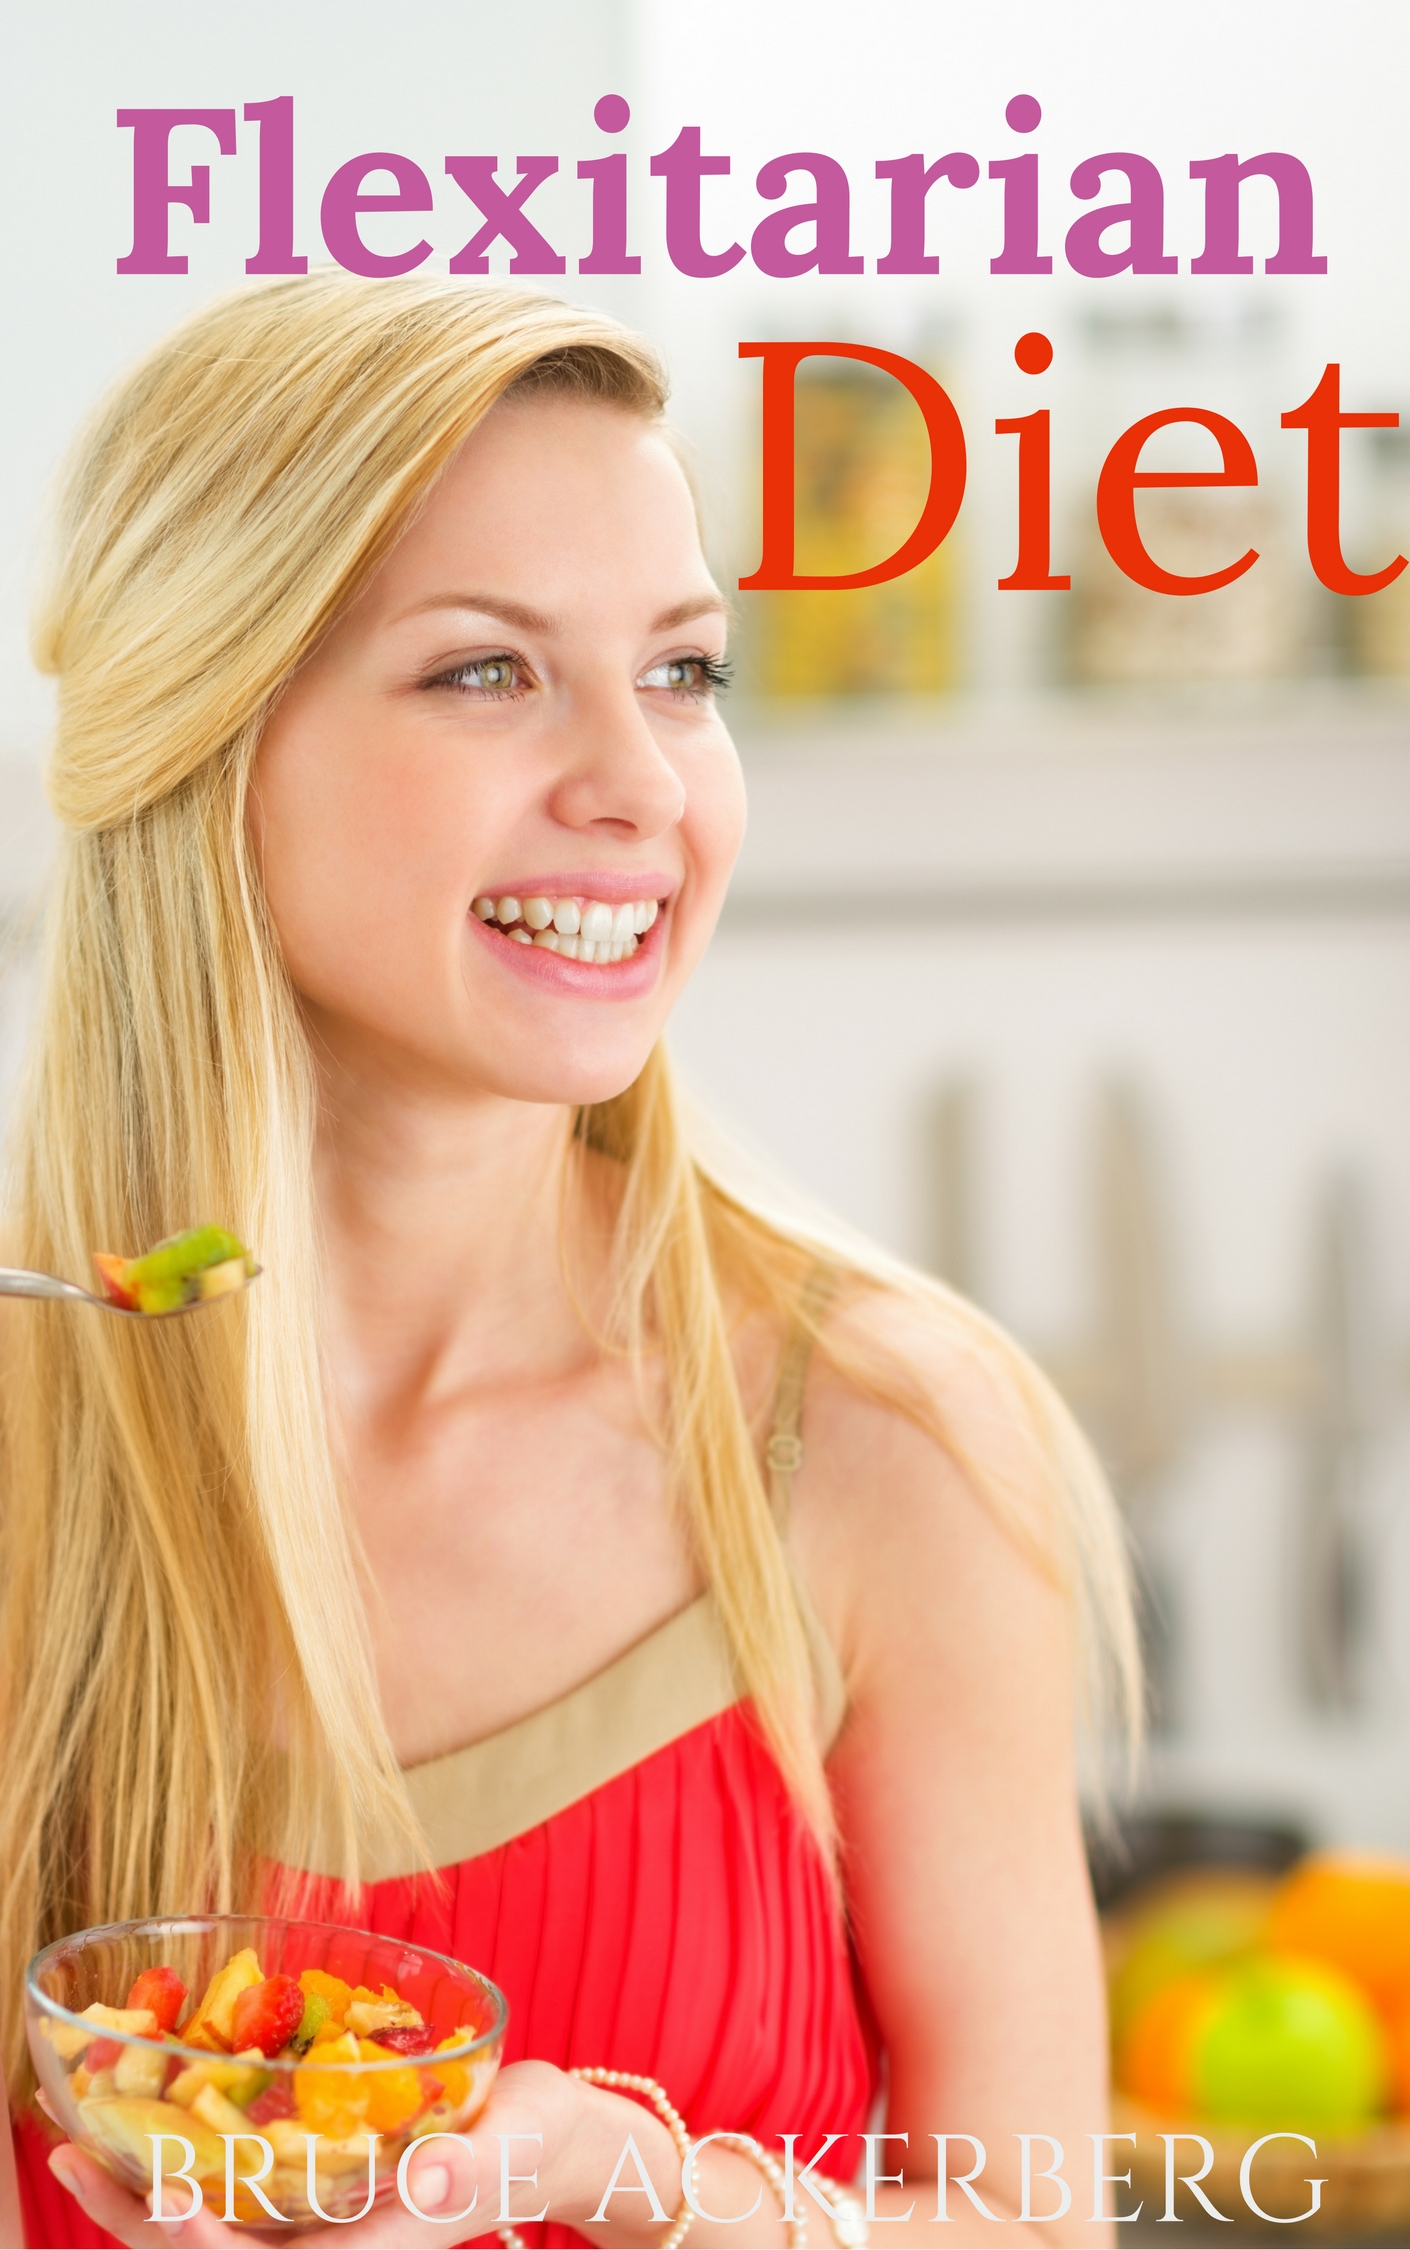 FREE: Flexitarian Diet: A Beginner’s Step-by-Step Guide by Henry Lee